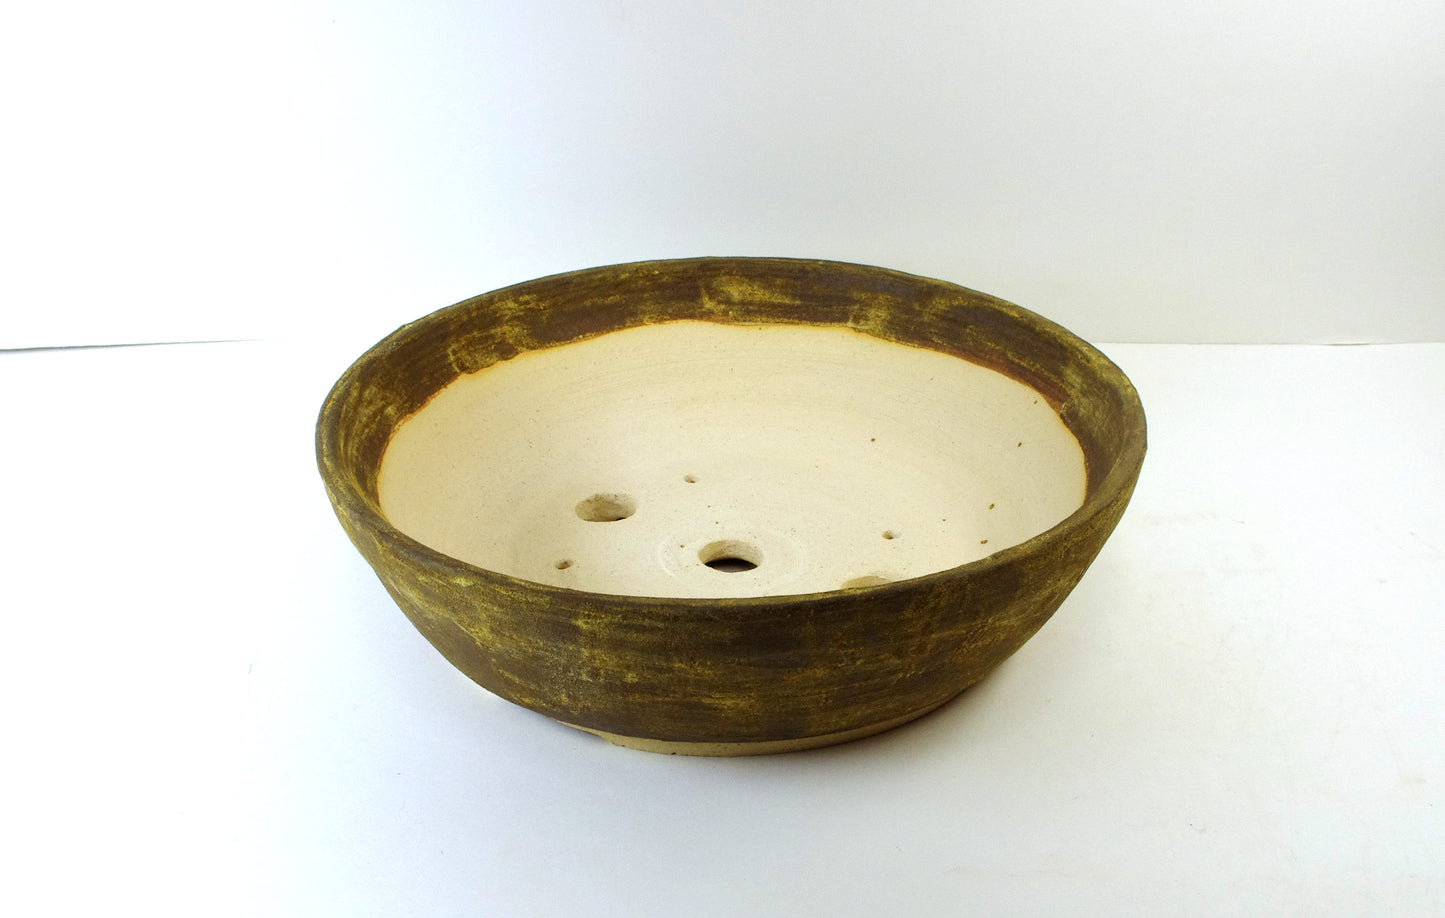 2119, Hand Thrown Stoneware Bonsai Pot, With Extra Wire Holes, 8 3/4 x 2 1/2 Browns